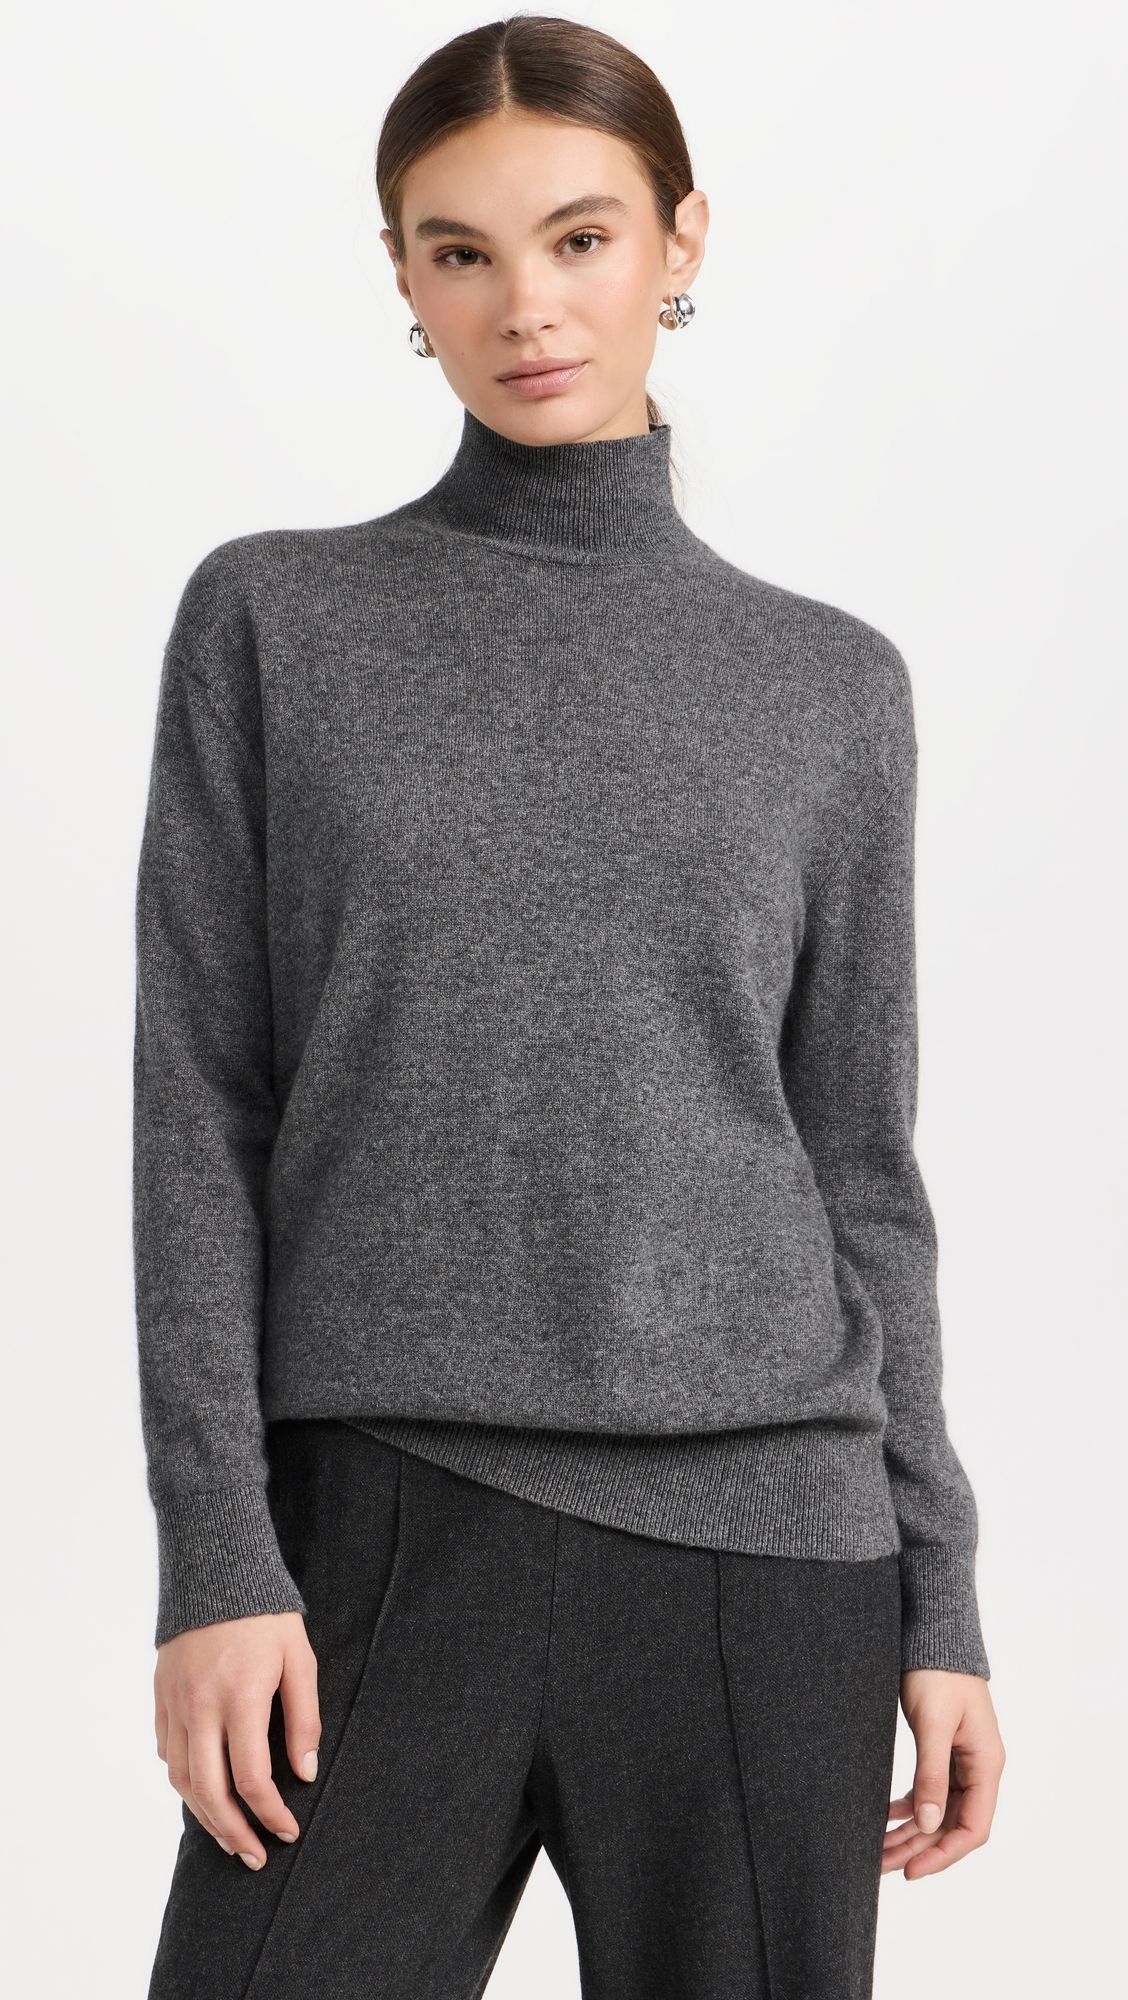 31 Best-Selling Basics Shopbop Can Barely Keep in Stock | Who What Wear